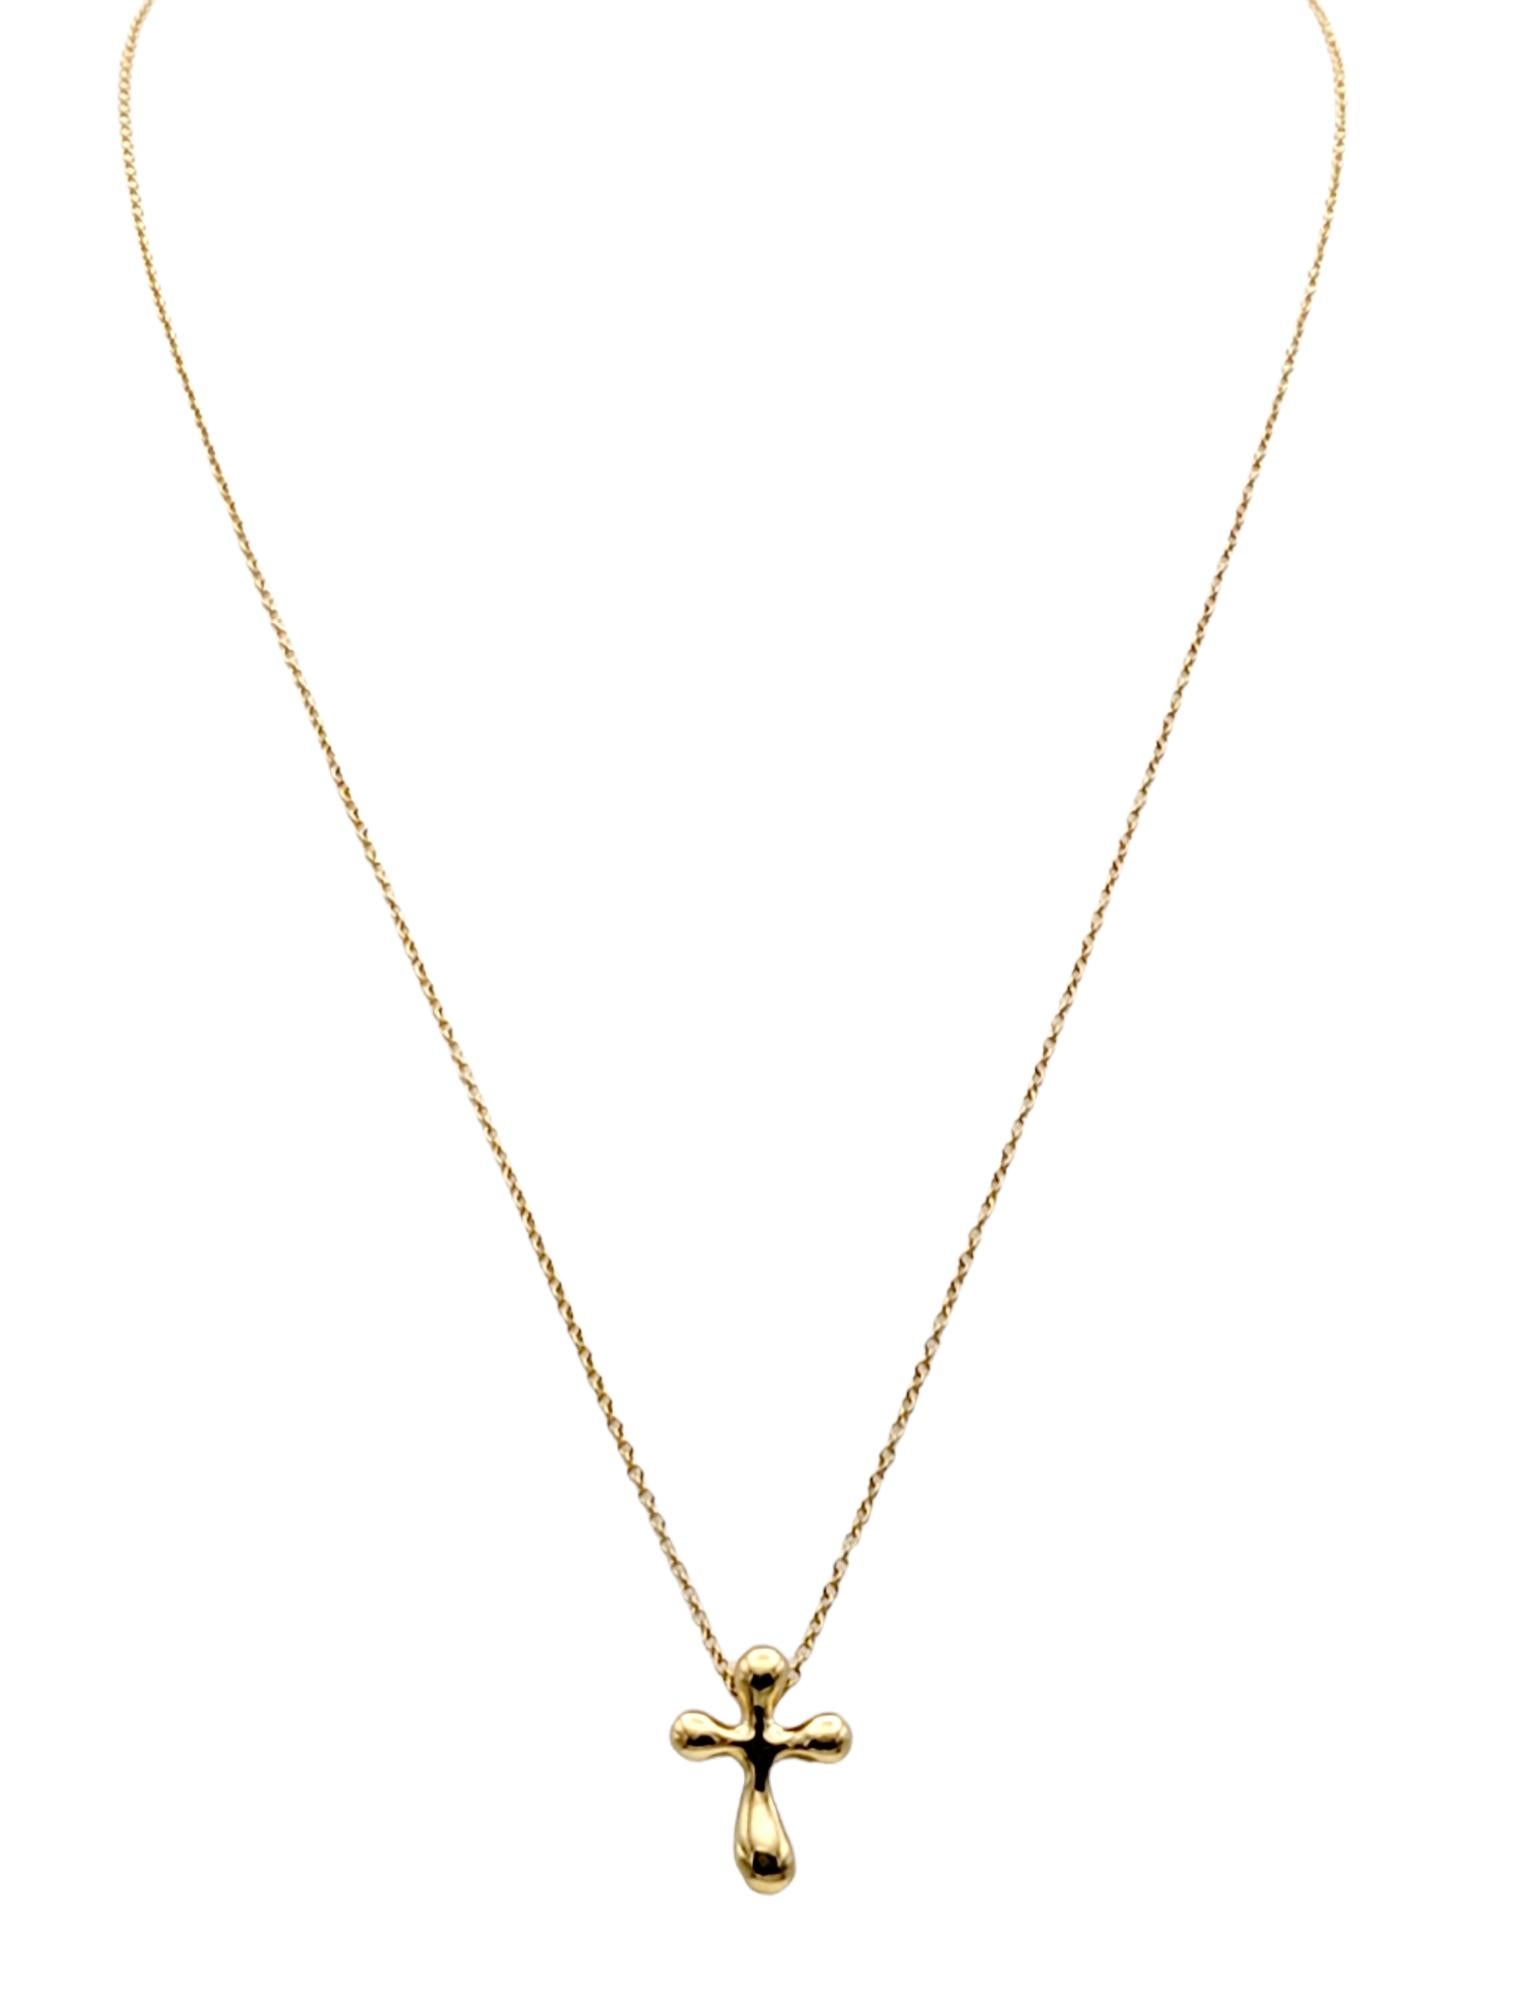 Simply stunning modernized 18 karat yellow gold cross pendant necklace designed by Elsa Peretti for Tiffany & Co.. This keepsake is truly a classic that will never go out of style. 
  
Metal: 18K Yellow Gold
Length: 16”
Cross width: 12 mm
Cross